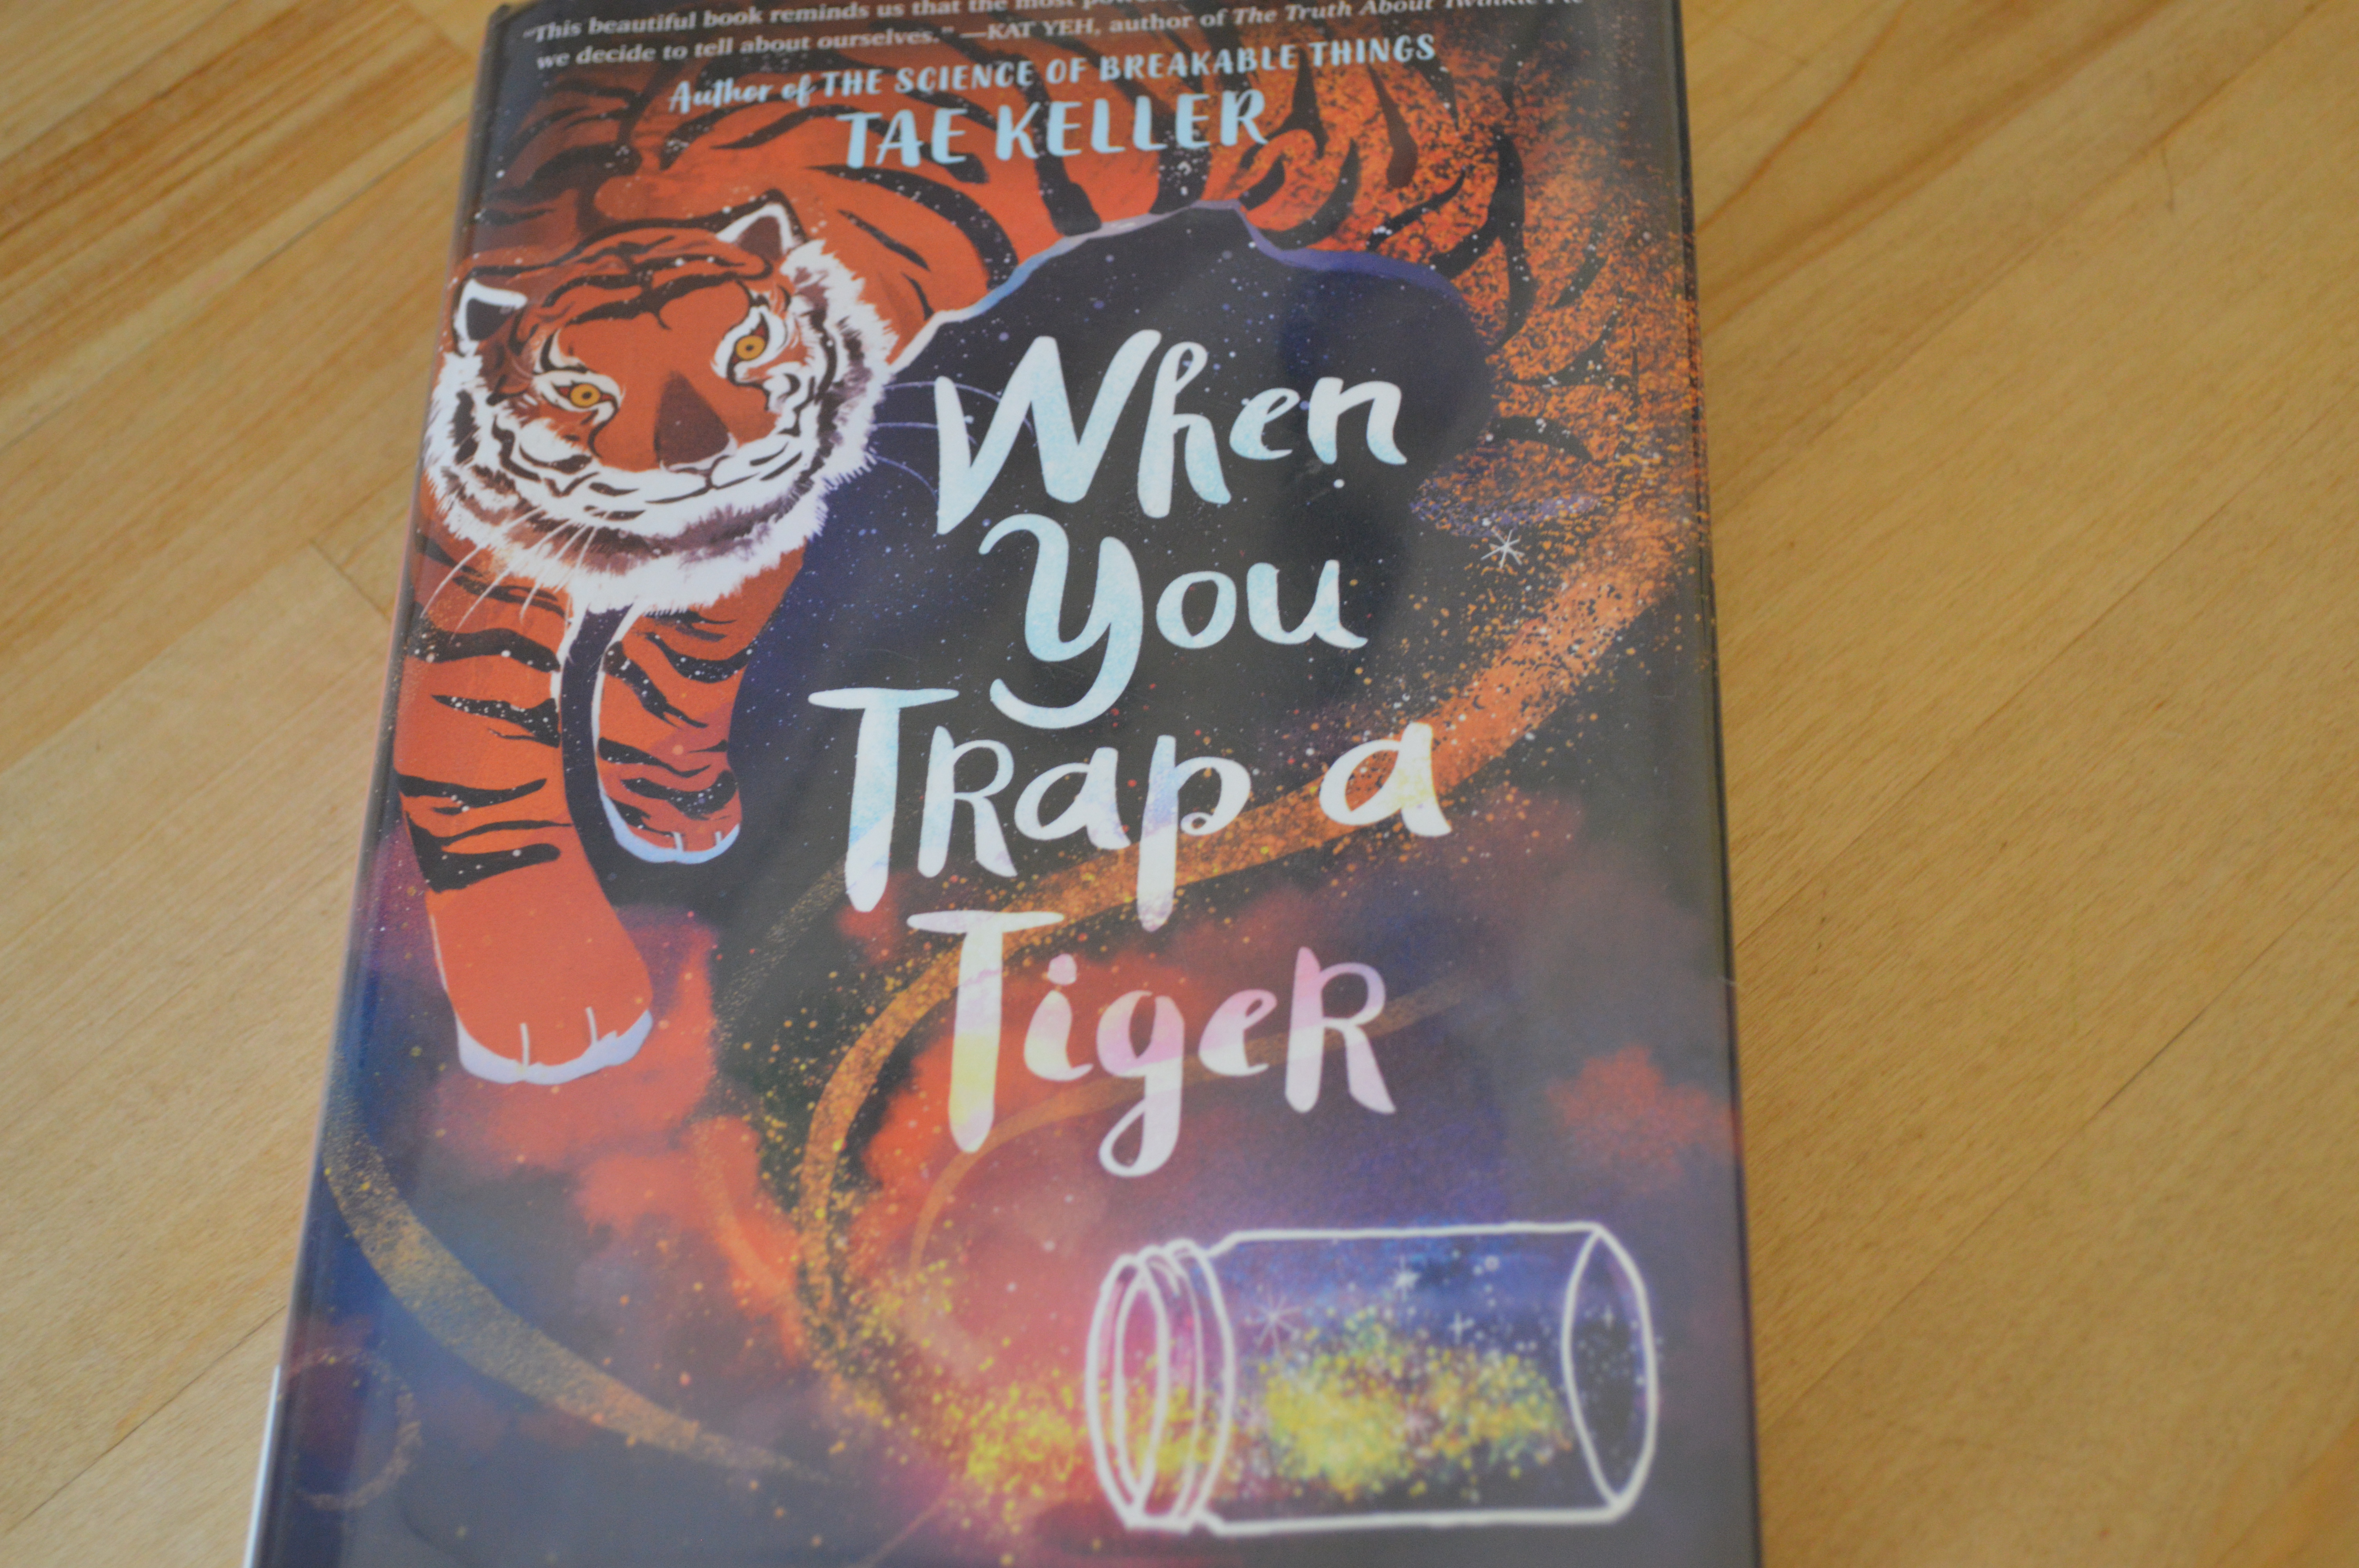 Newbery Review #100 (When You Trap a Tiger, Keller, 2021)